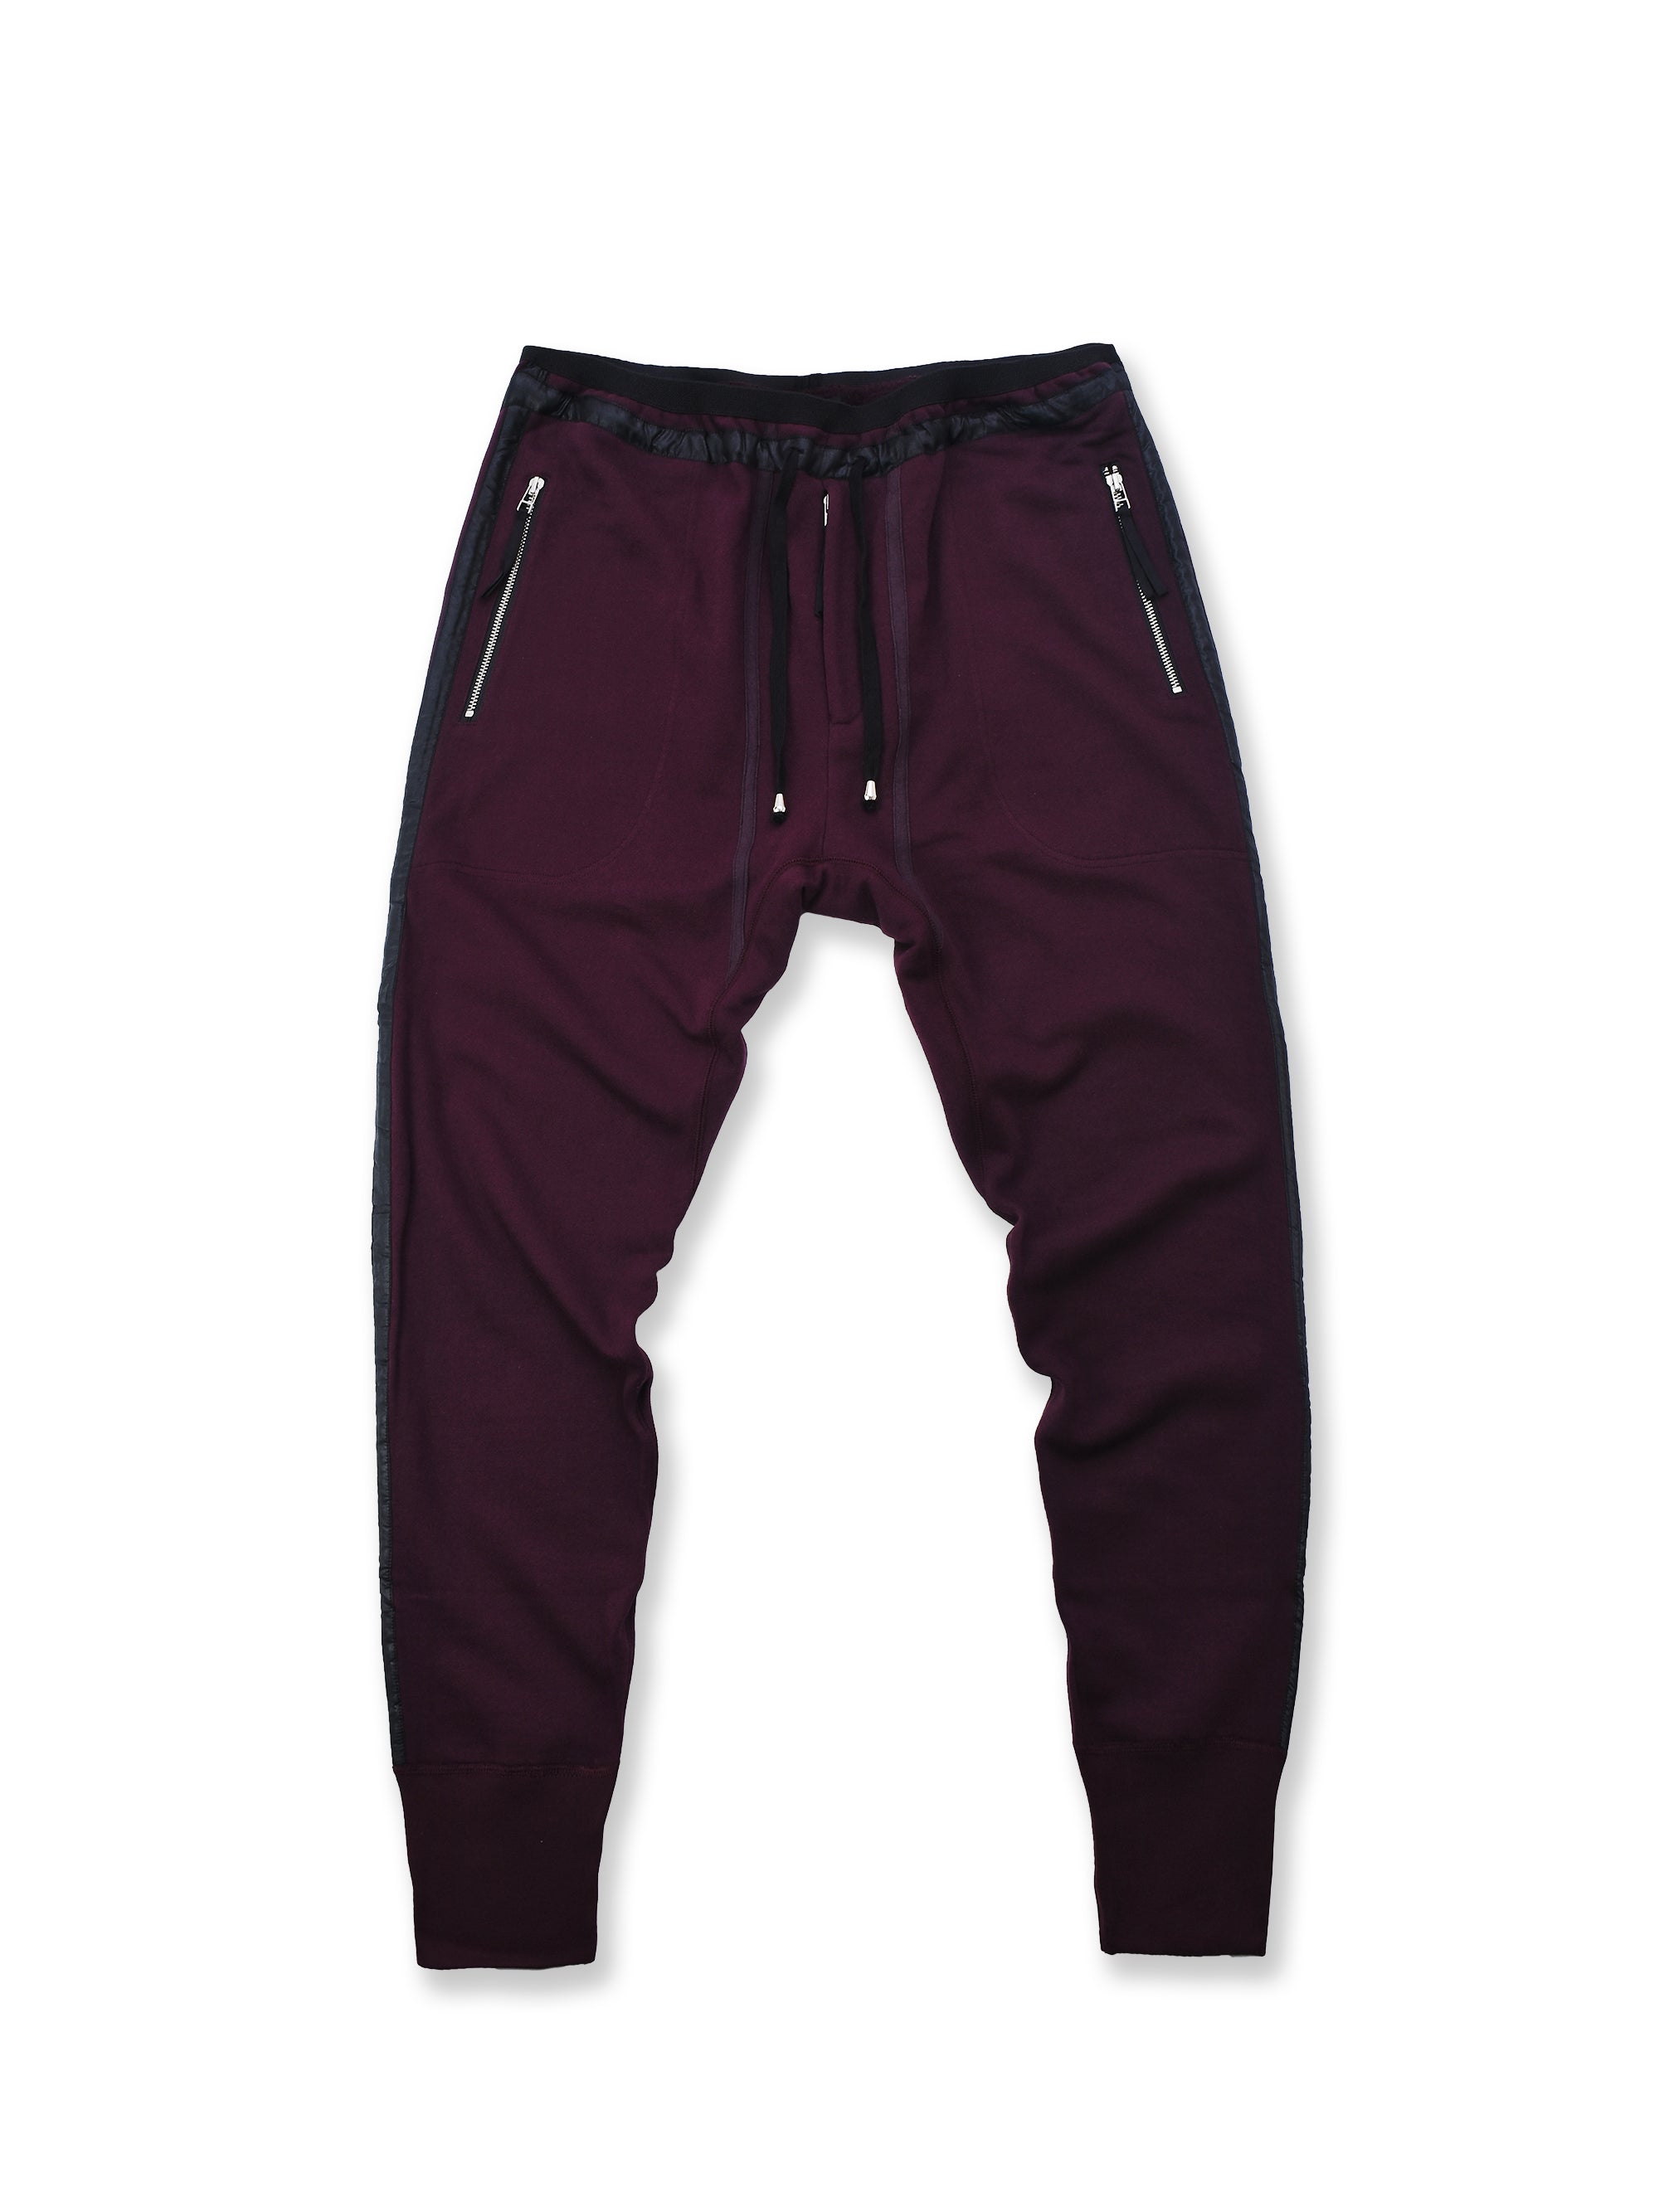 BURGUNDY AND BLACK SATIN STRIPED JOGGERS